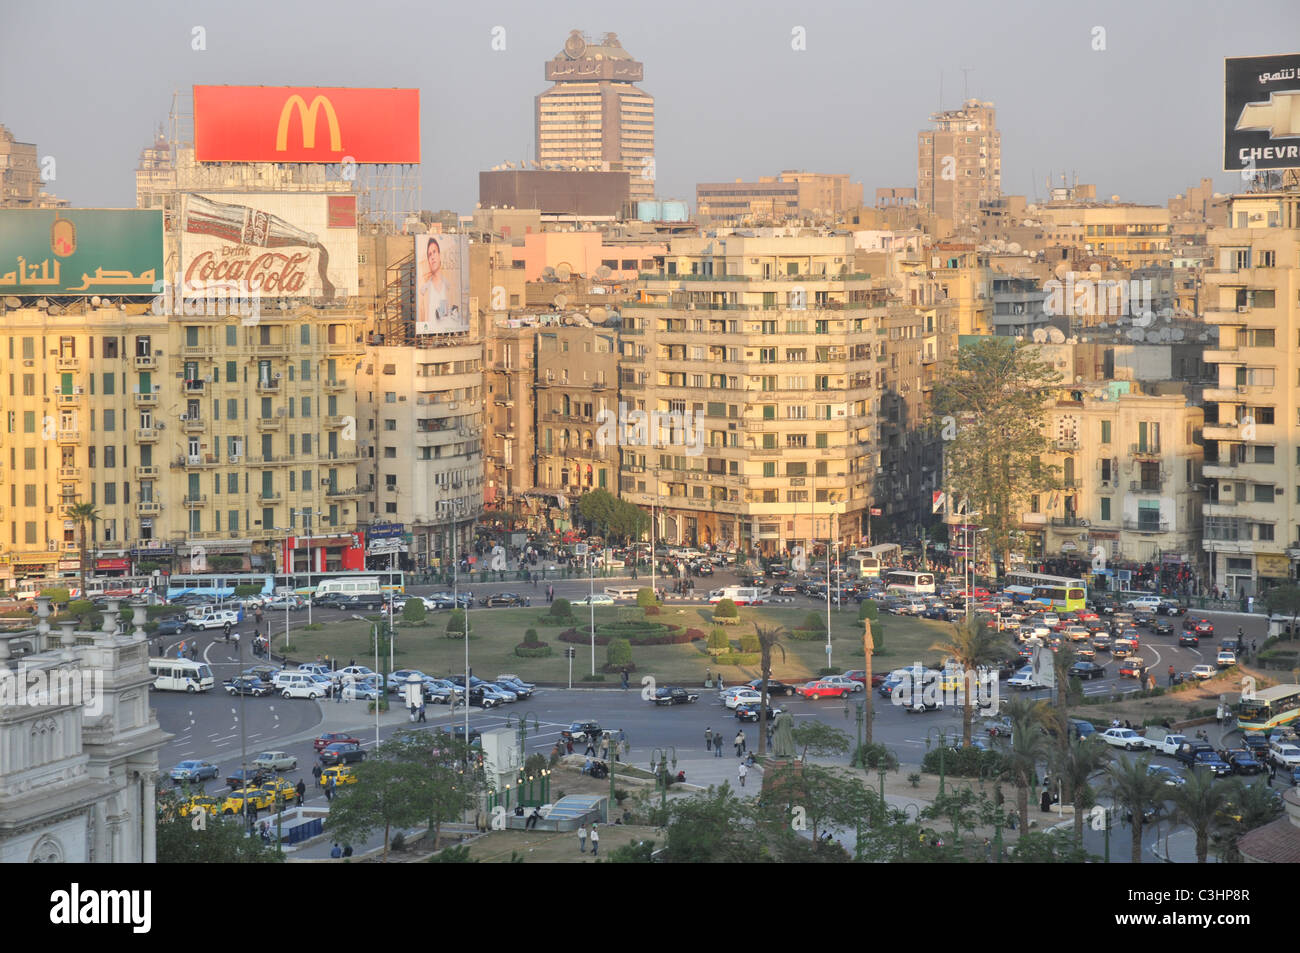 Tahrir Square Cairo, Egypt in 2010, a year before the revolution that brought down Hosni Mubarak. Stock Photo